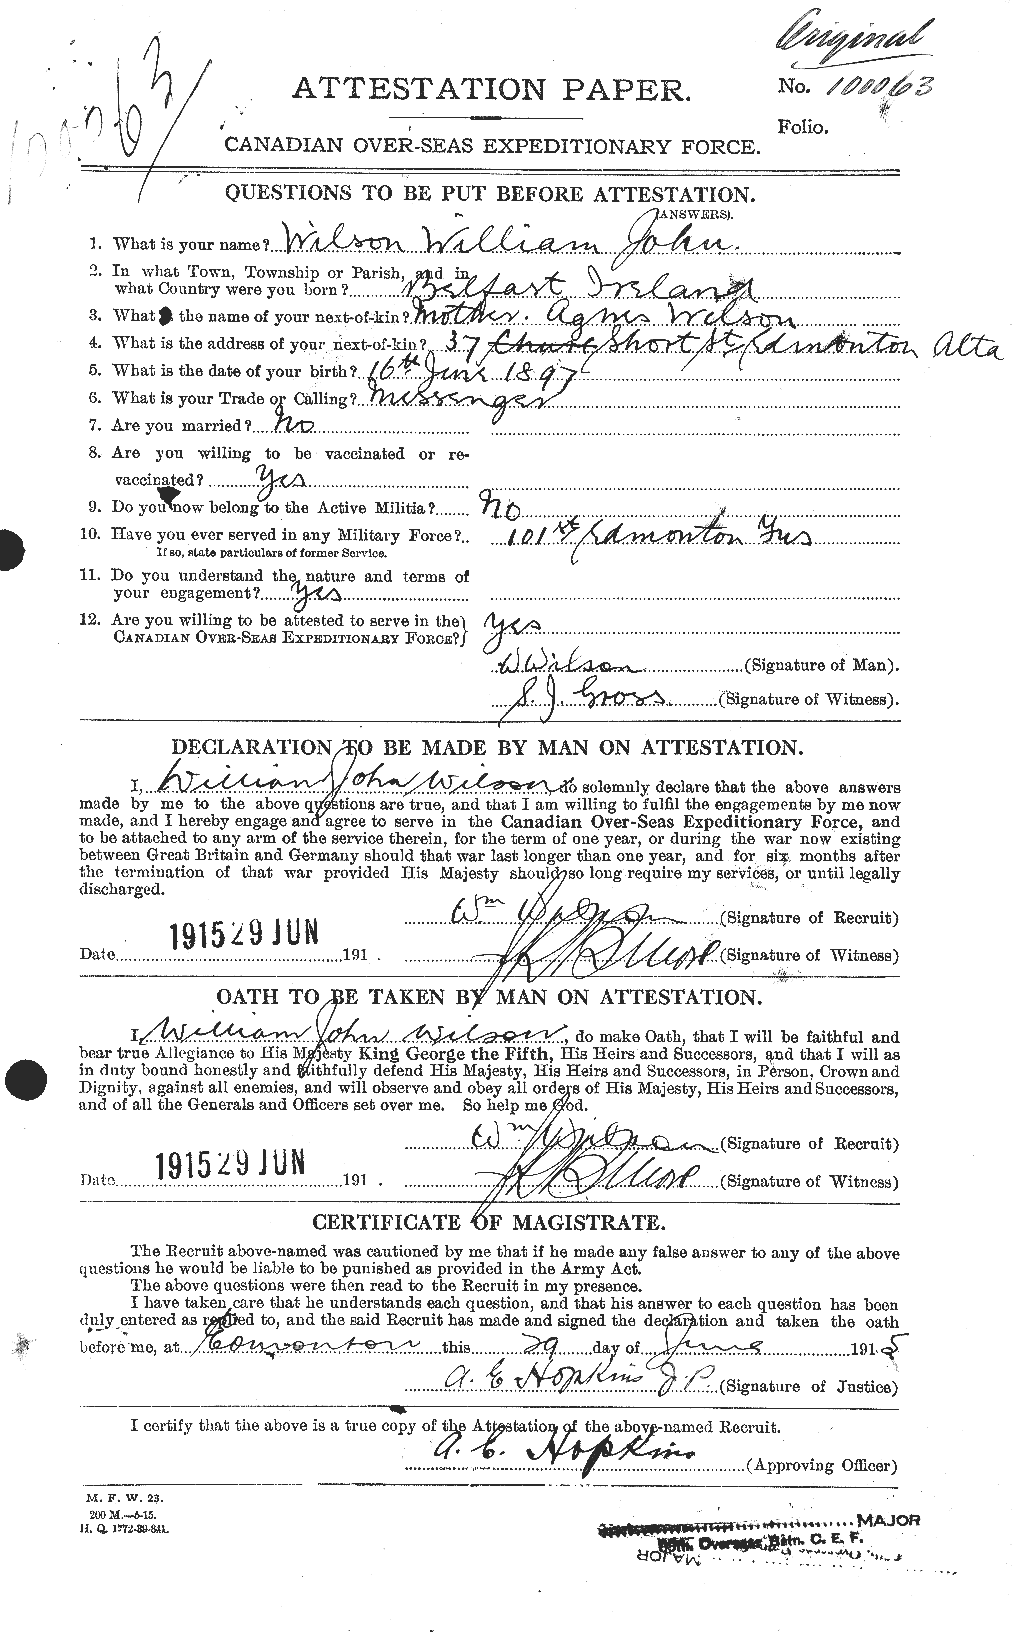 Personnel Records of the First World War - CEF 682059a